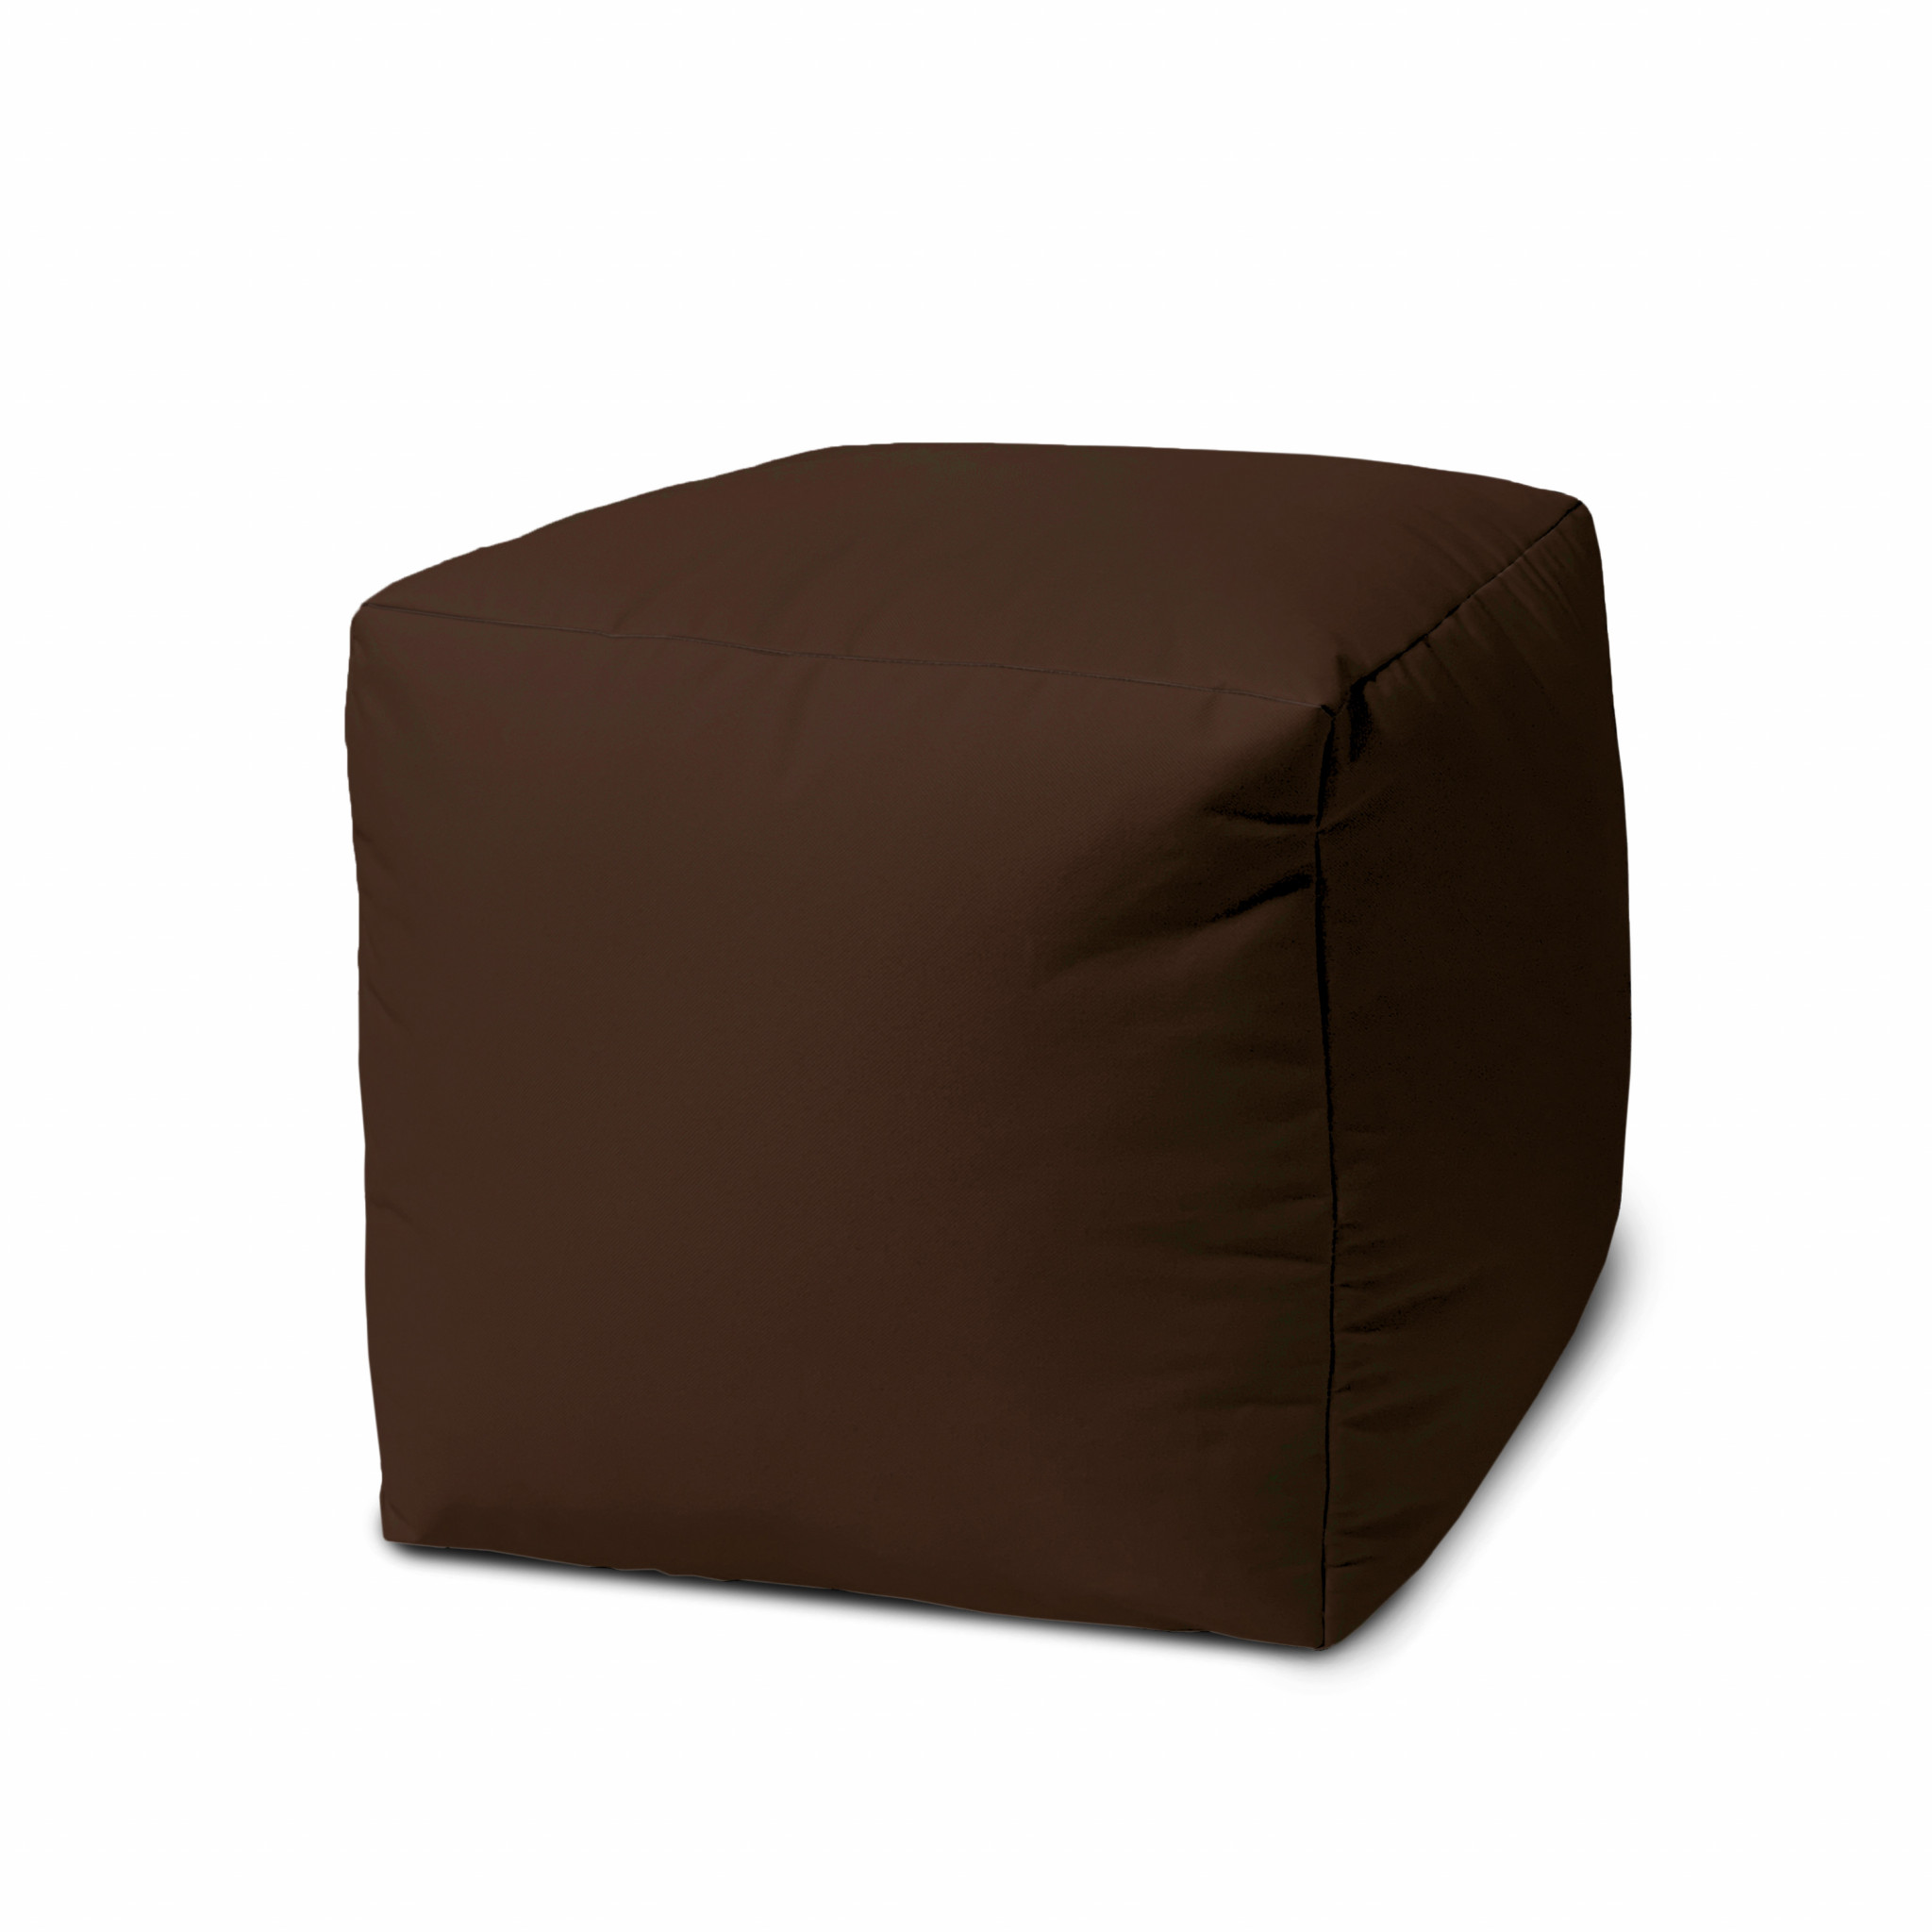 17" Cool Dark Chocolate Brown Solid Color Indoor Outdoor Pouf Cover-474993-1